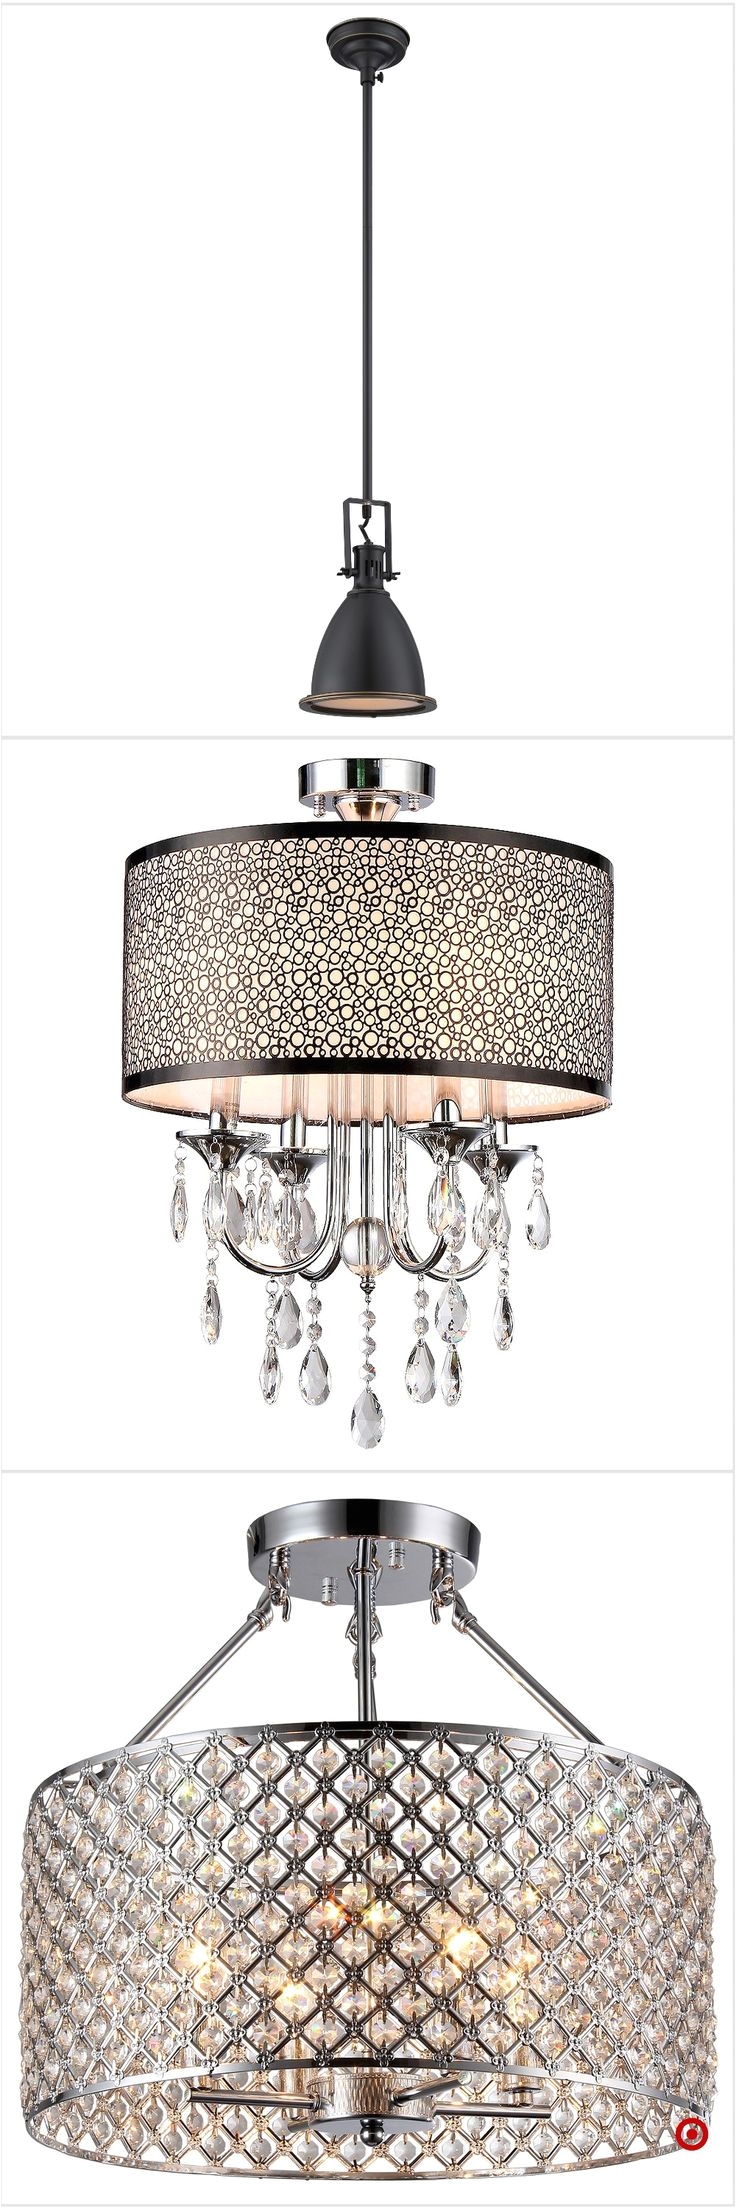 shop target for ceiling lights you will love at great low prices free shipping on